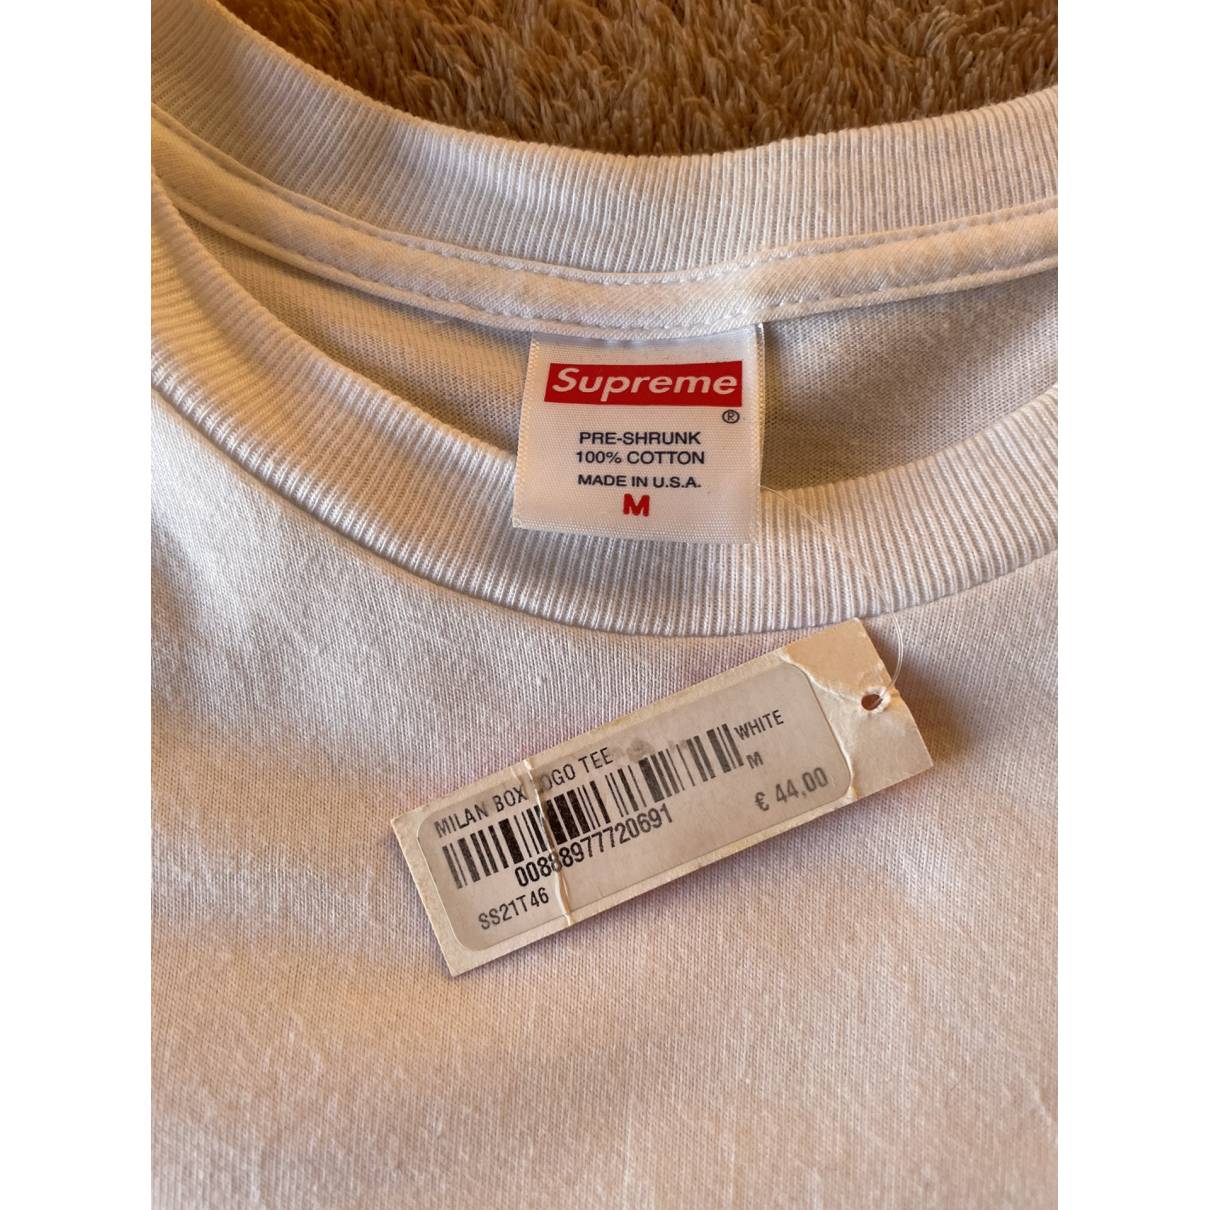 Supreme Box Logo T Shirt For Men Women And Youth